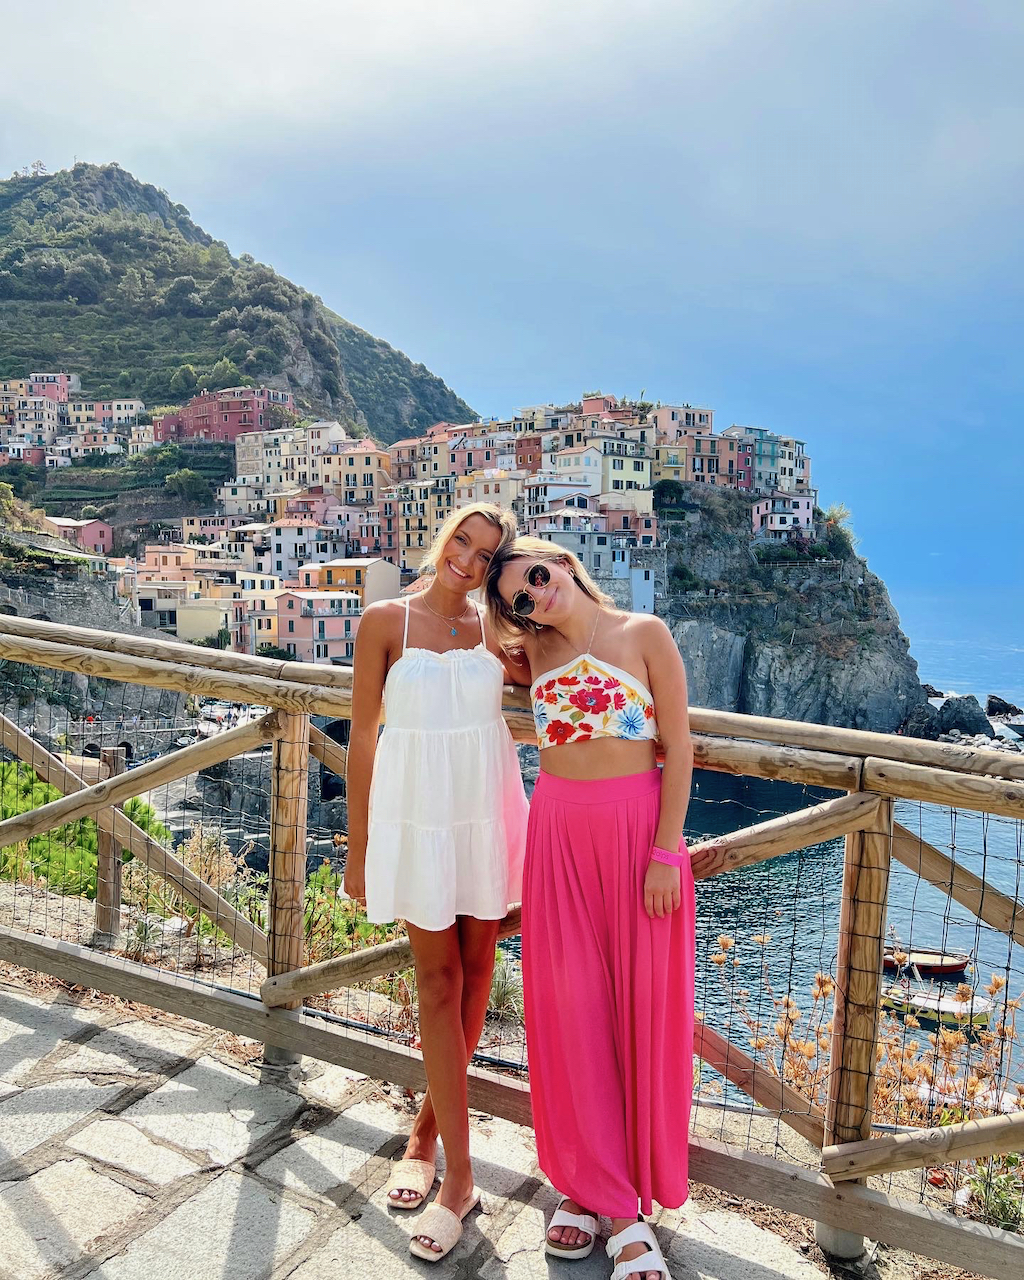 How To Day Trip to Cinque Terre